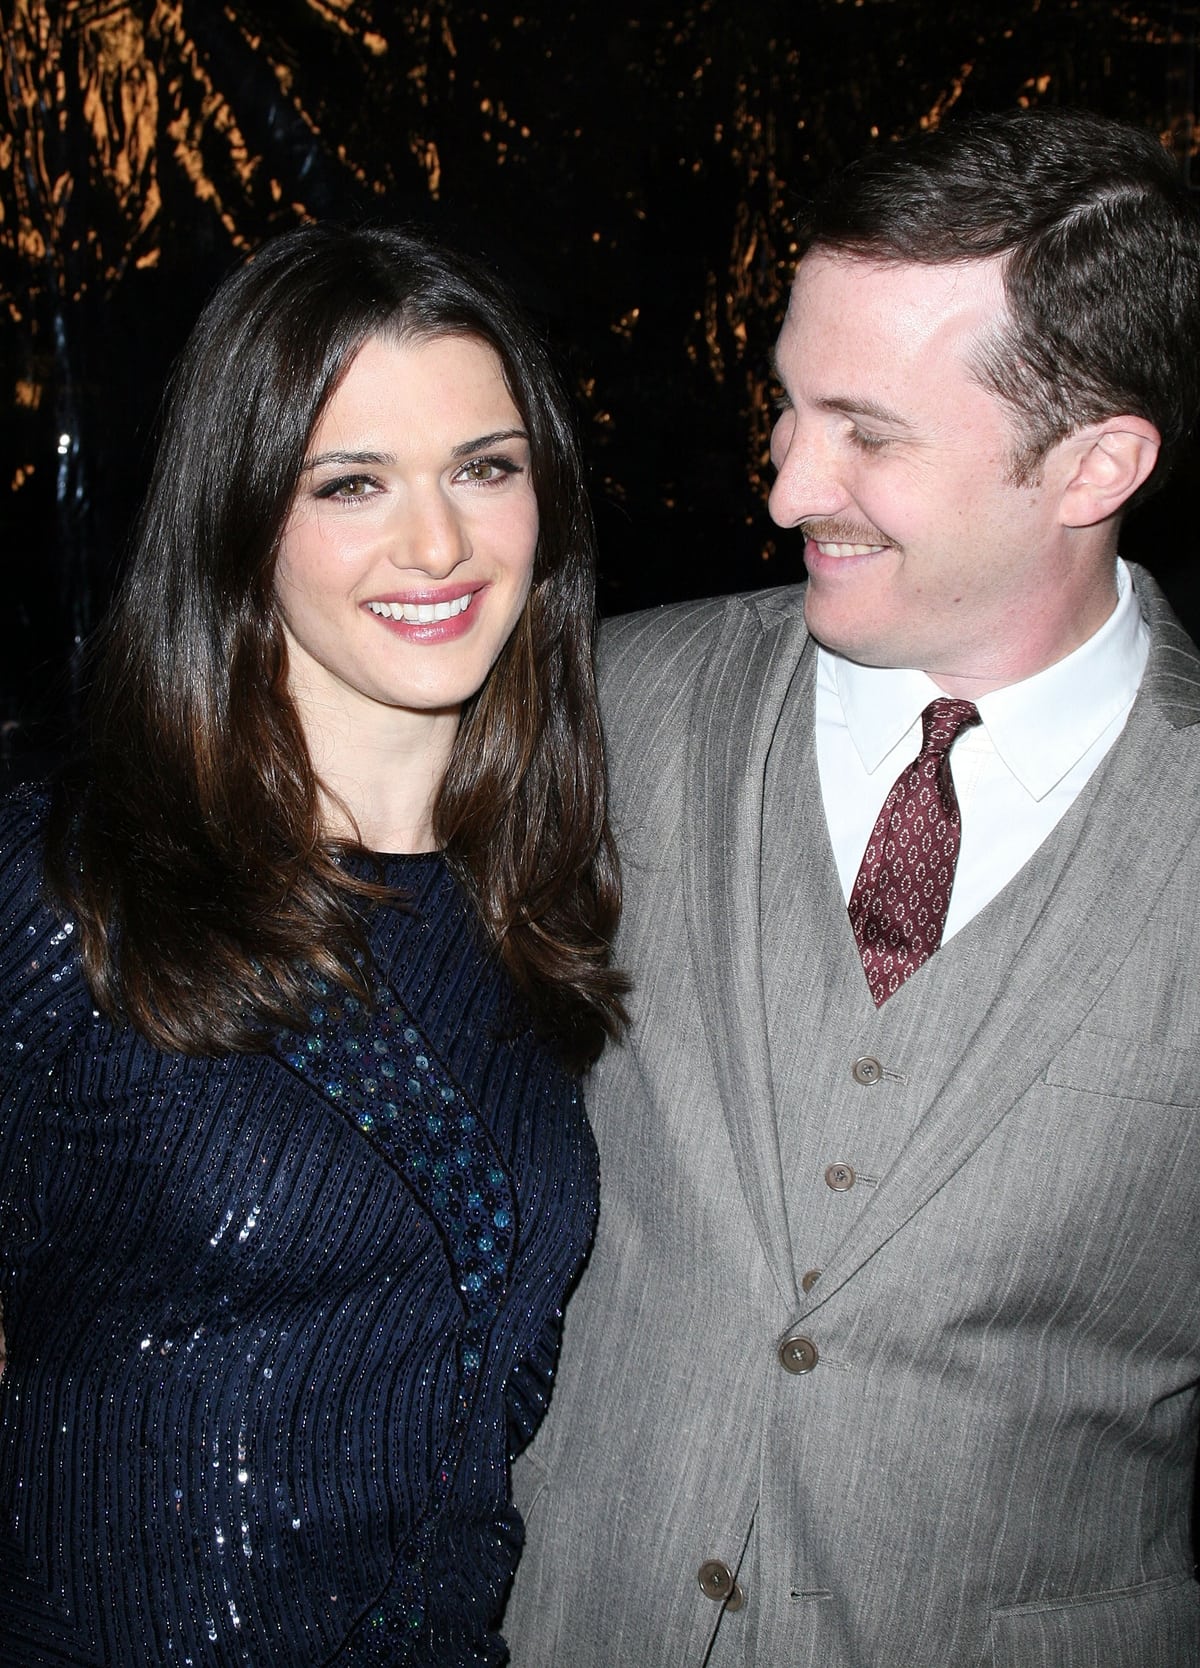 Darren Aronofsky and Rachel Weisz were engaged until 2010 and their son Henry was born on May 31, 2006